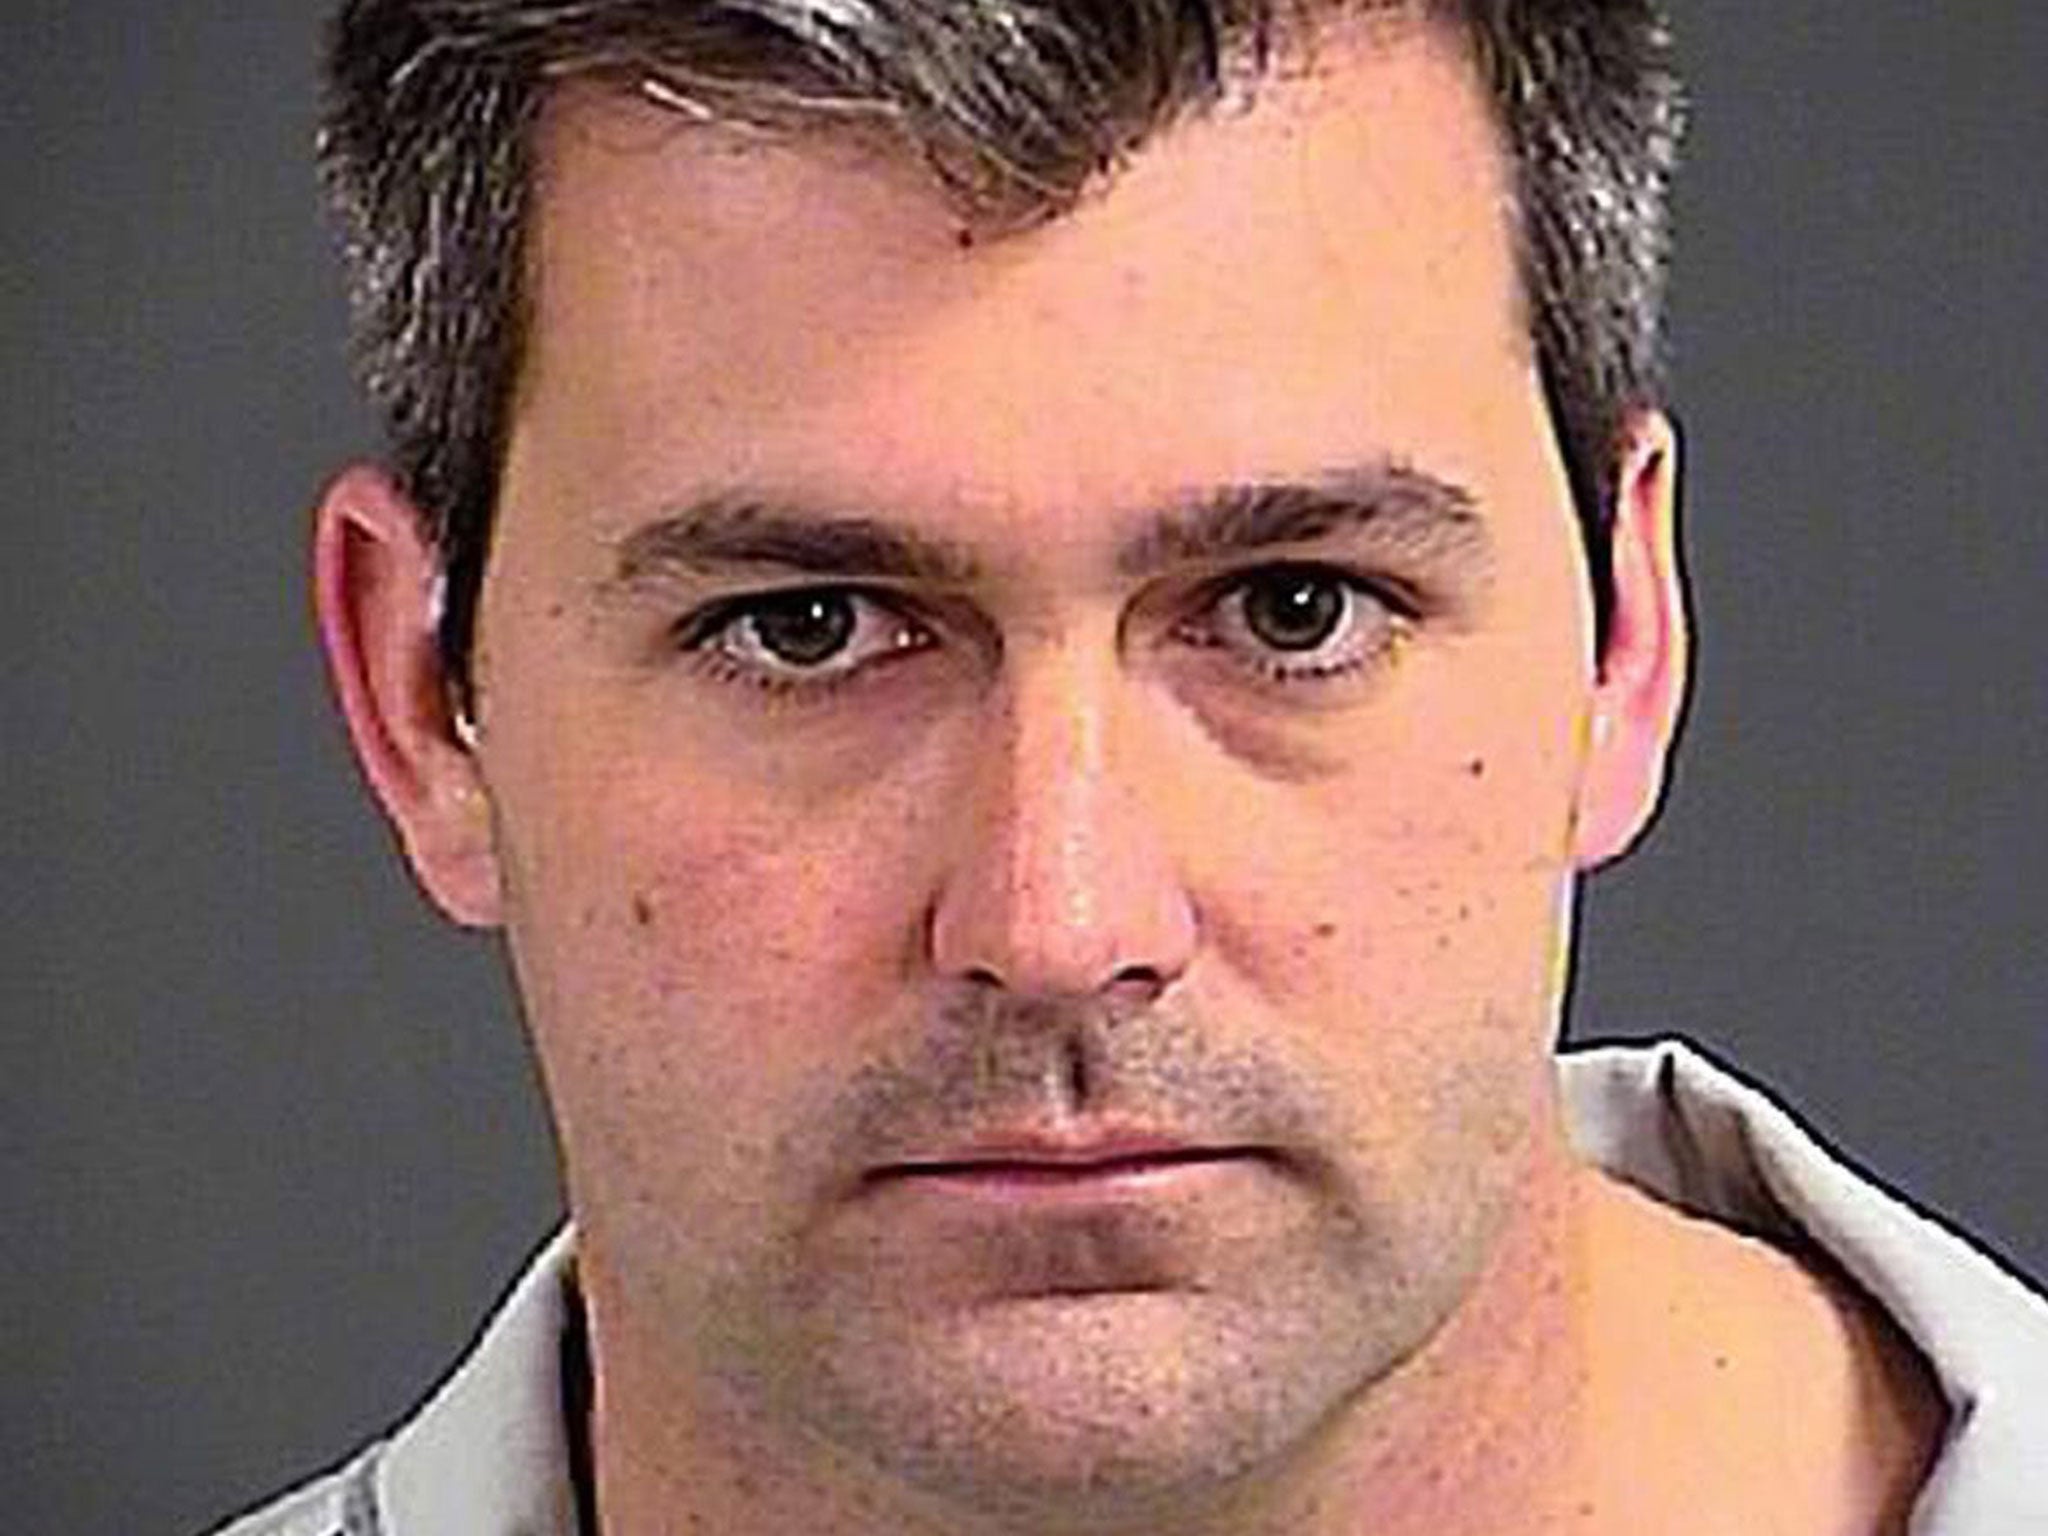 Michael Slager was deemed 'an unreasonable danger to the community' by the court